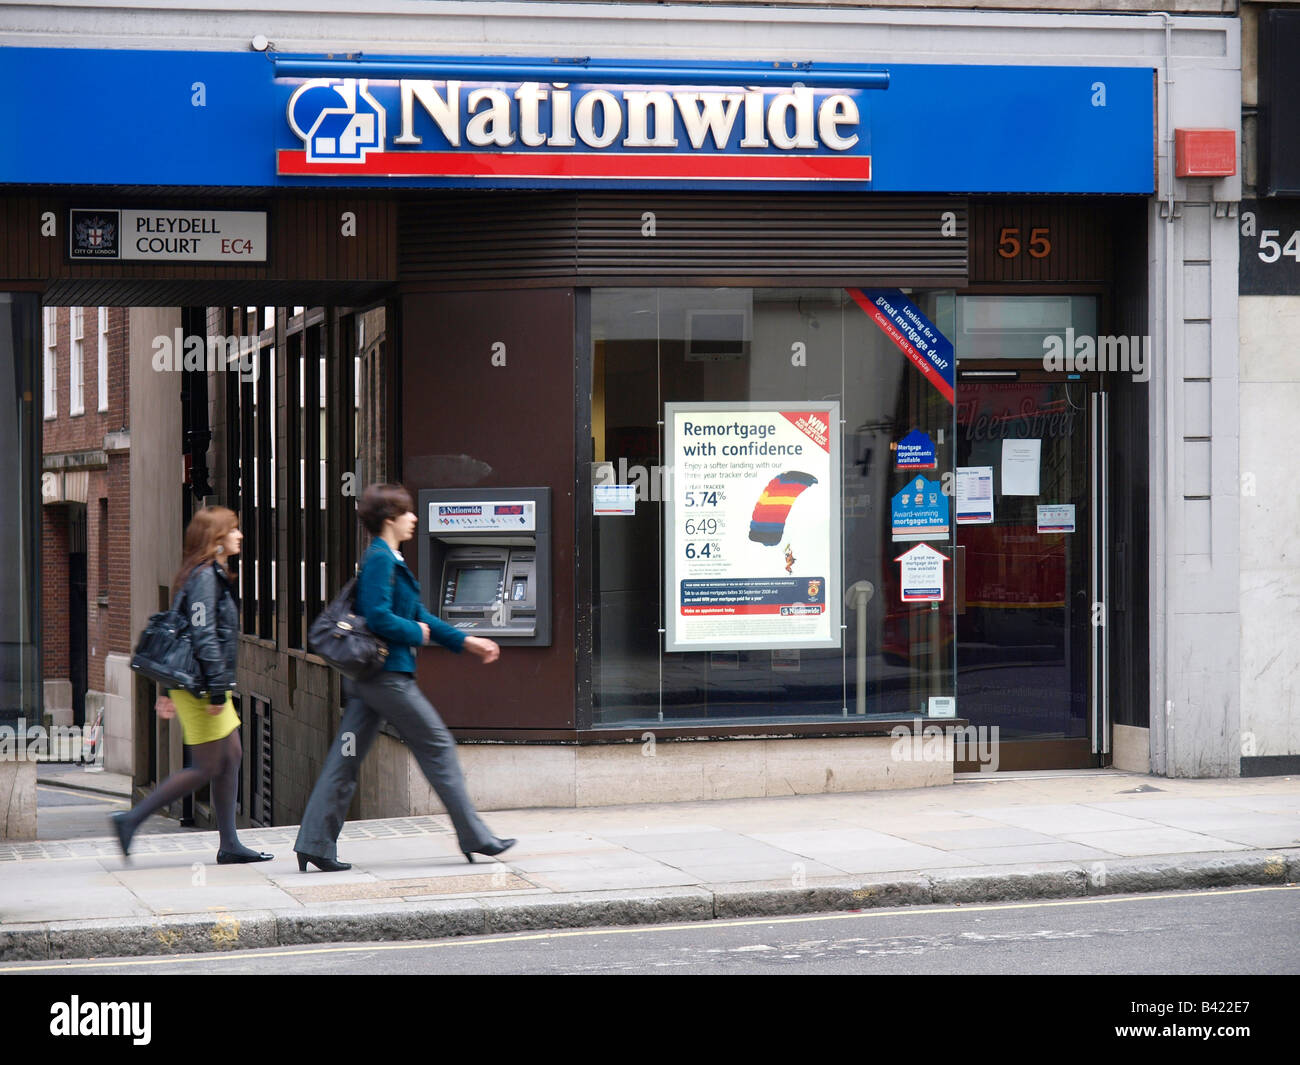 Nationwide mortgage shop with ATM and passing people Pleydell Court London UK Stock Photo